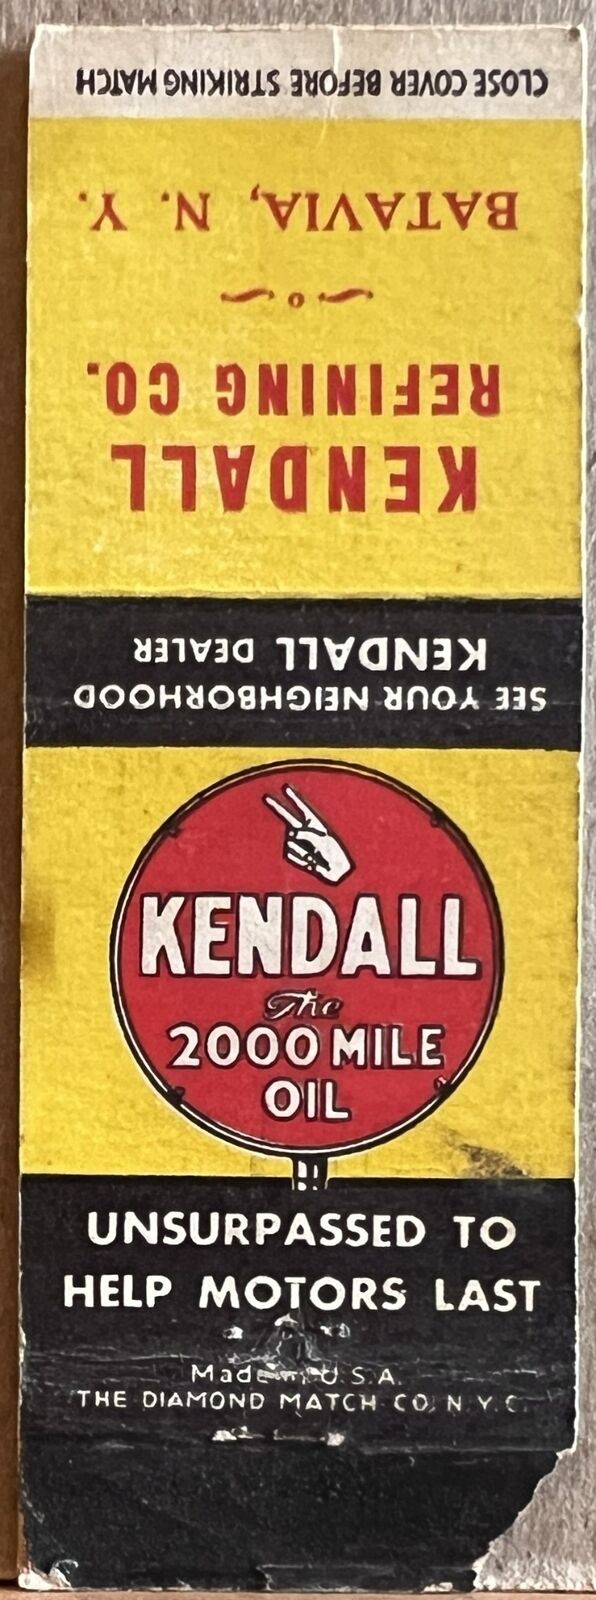 Kendall Refining Co Batavia NY New York Kendall 2000 Mile Oil Matchbook Cover